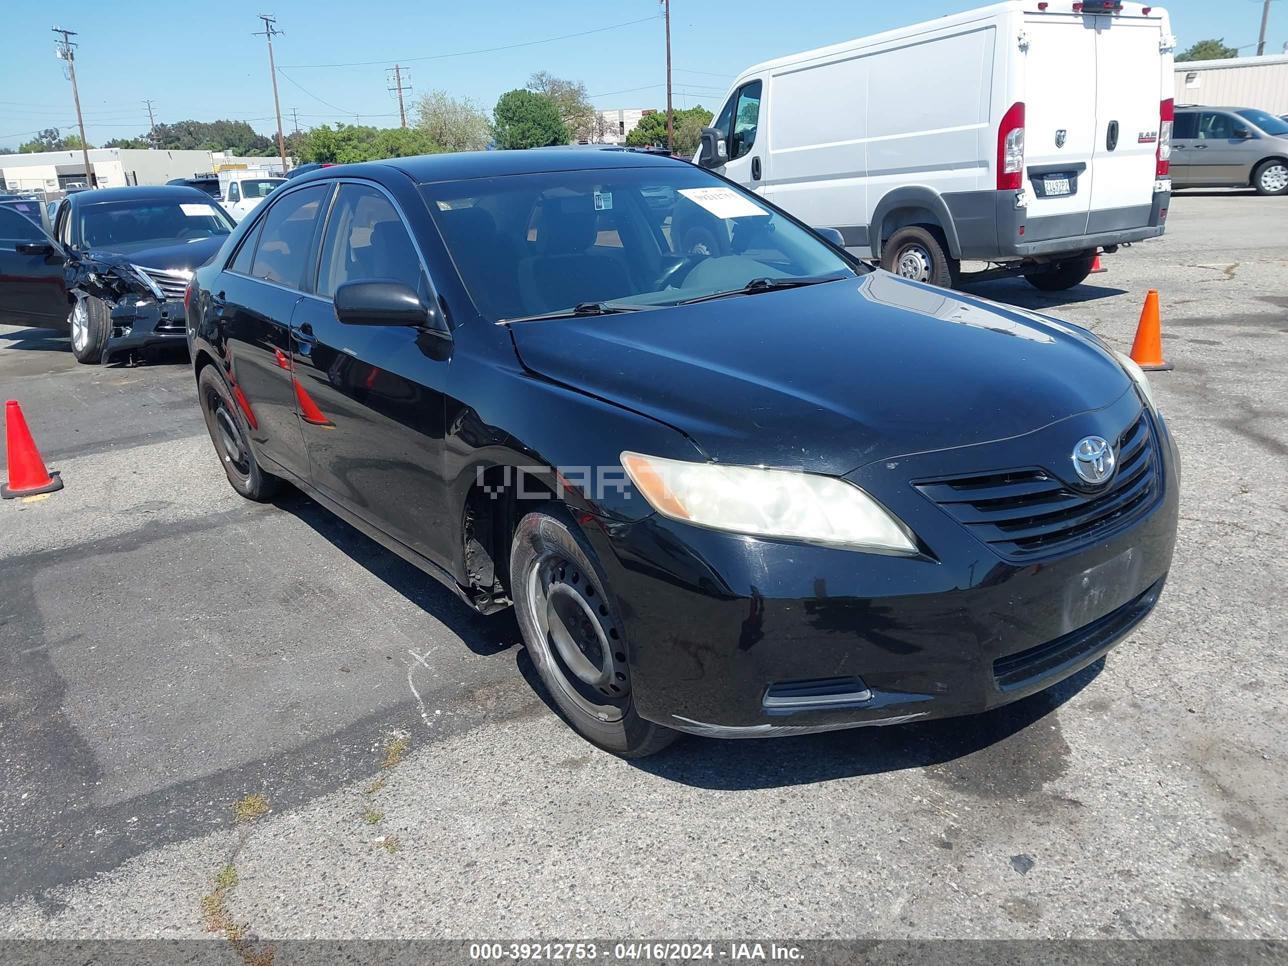 VIN: 4T4BE46K09R130510 - toyota camry